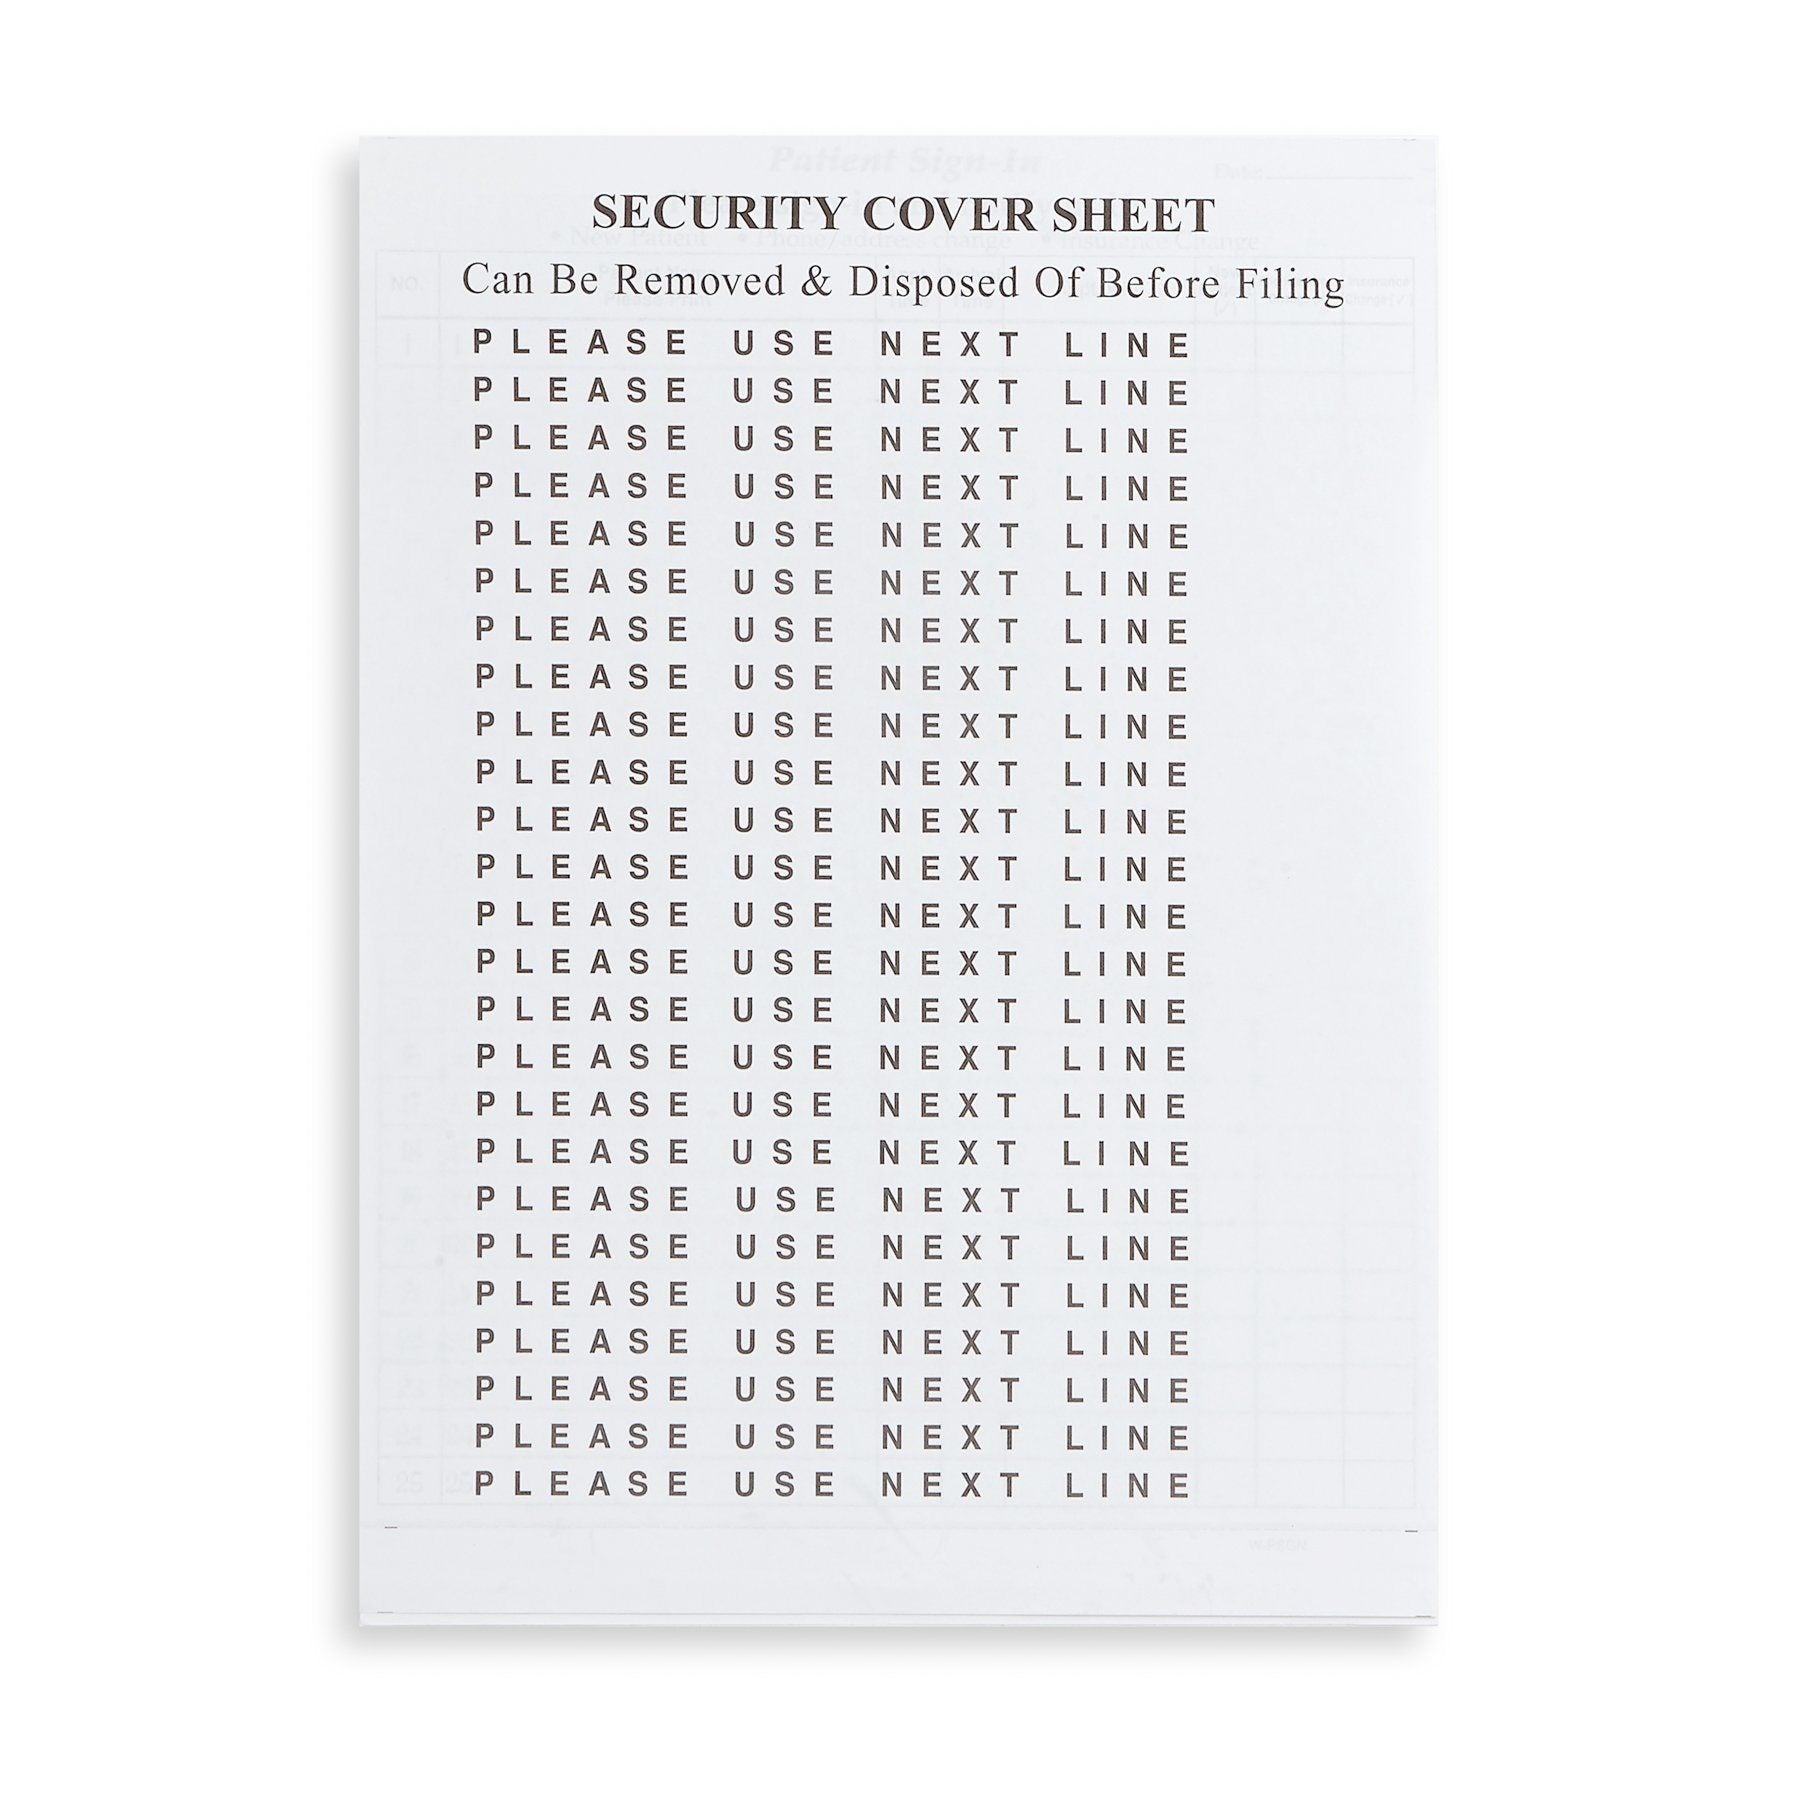 Blue Summit Supplies HIPAA Compliant Sign In Sheets 125 Sheets